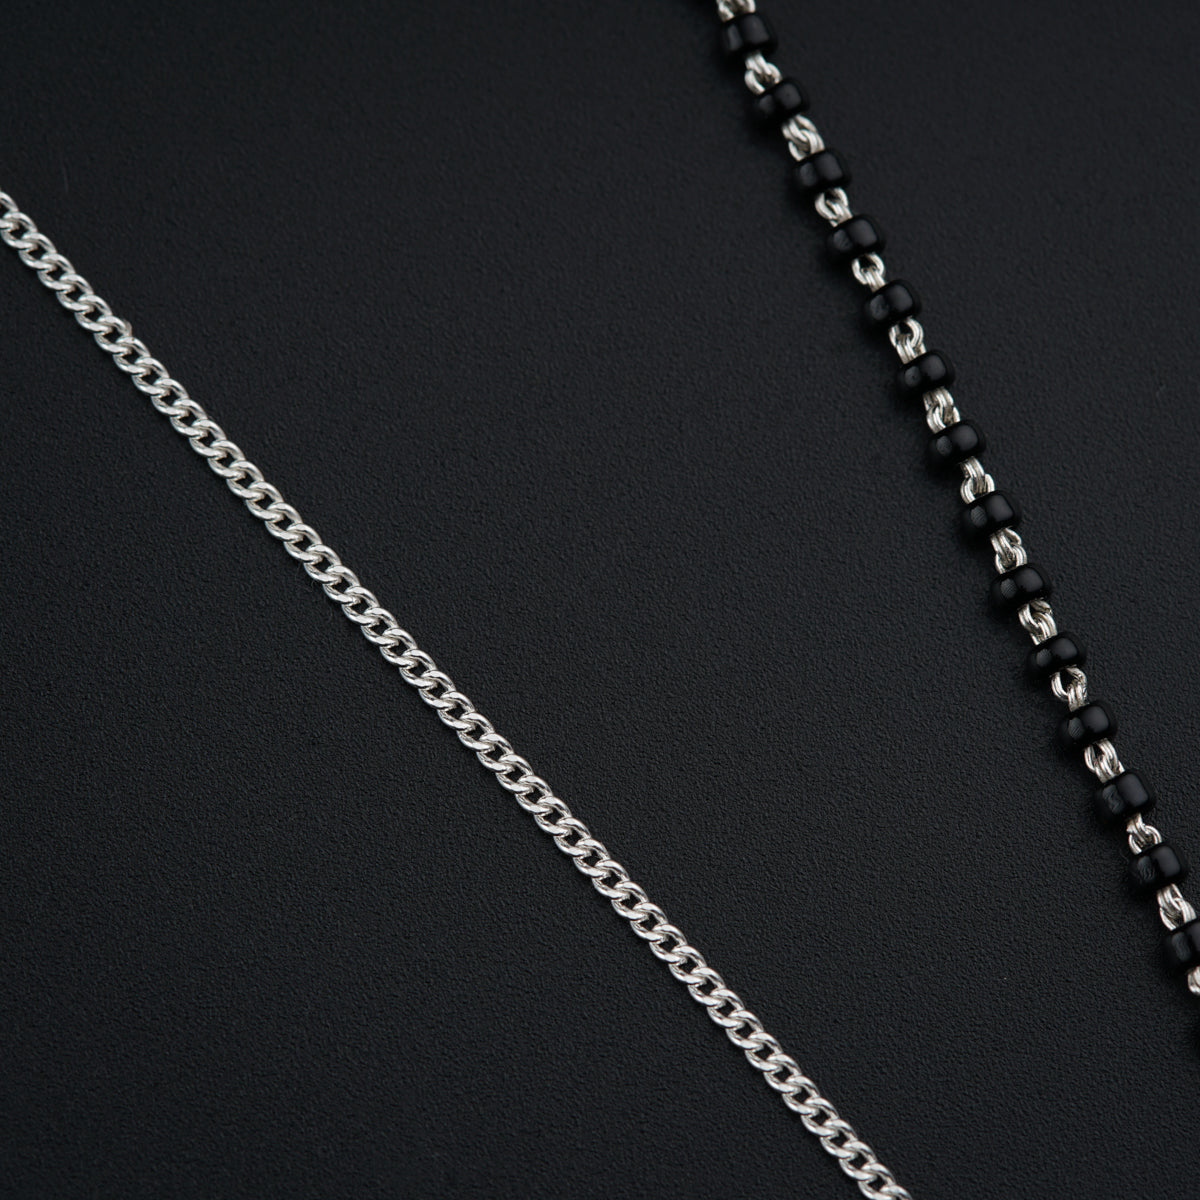 a black and silver necklace with a chain attached to it